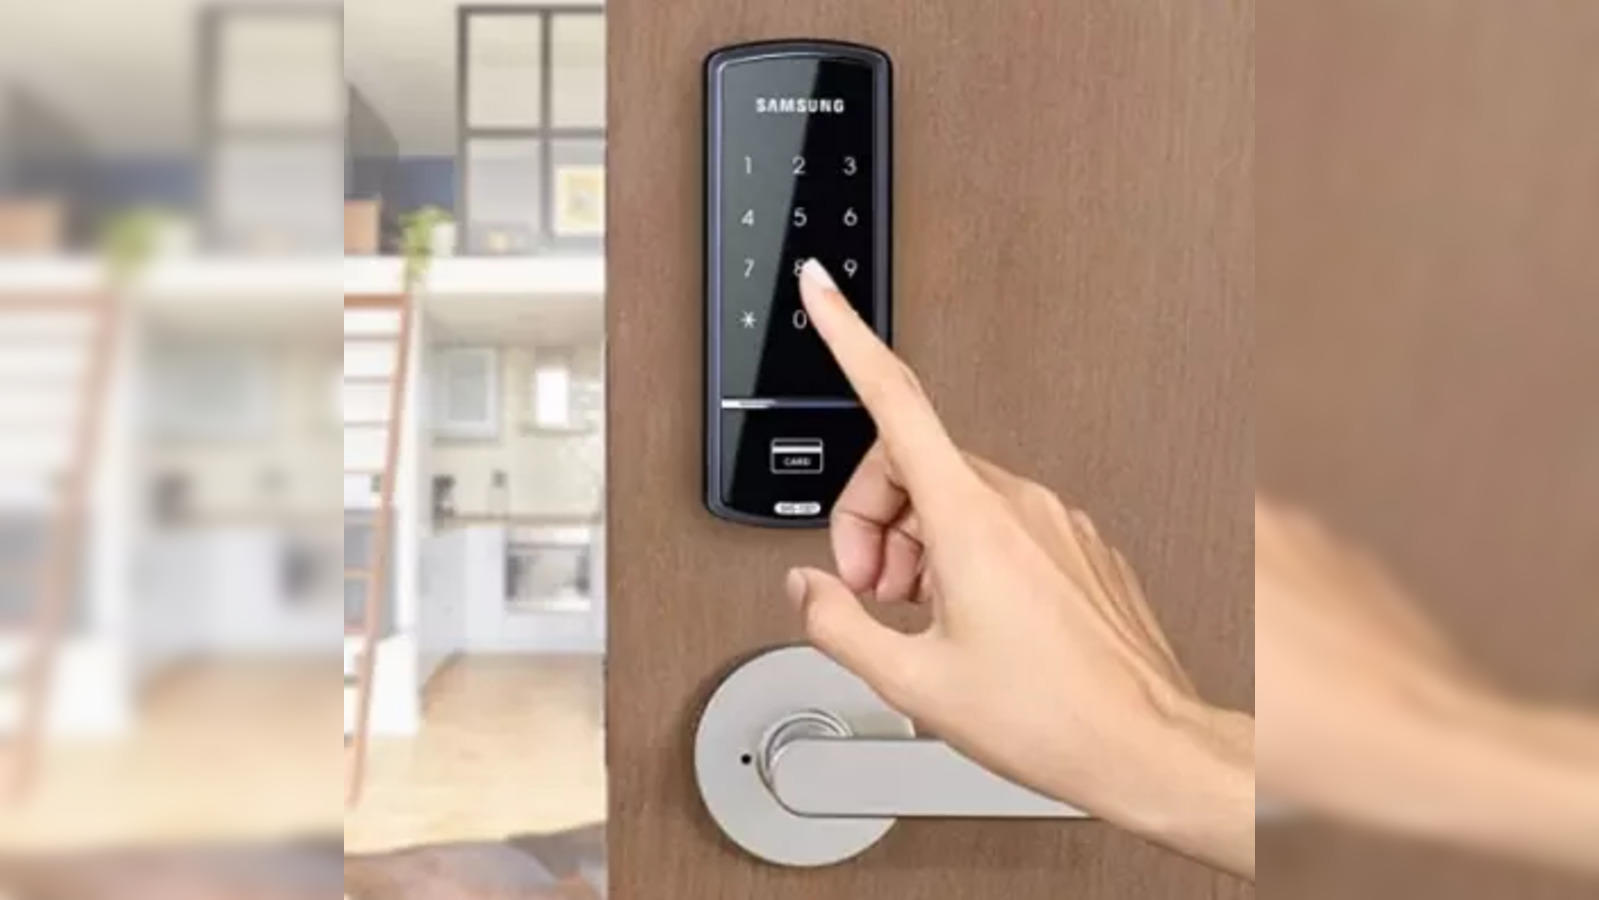 smart locks: How do smart locks work, are they really secure